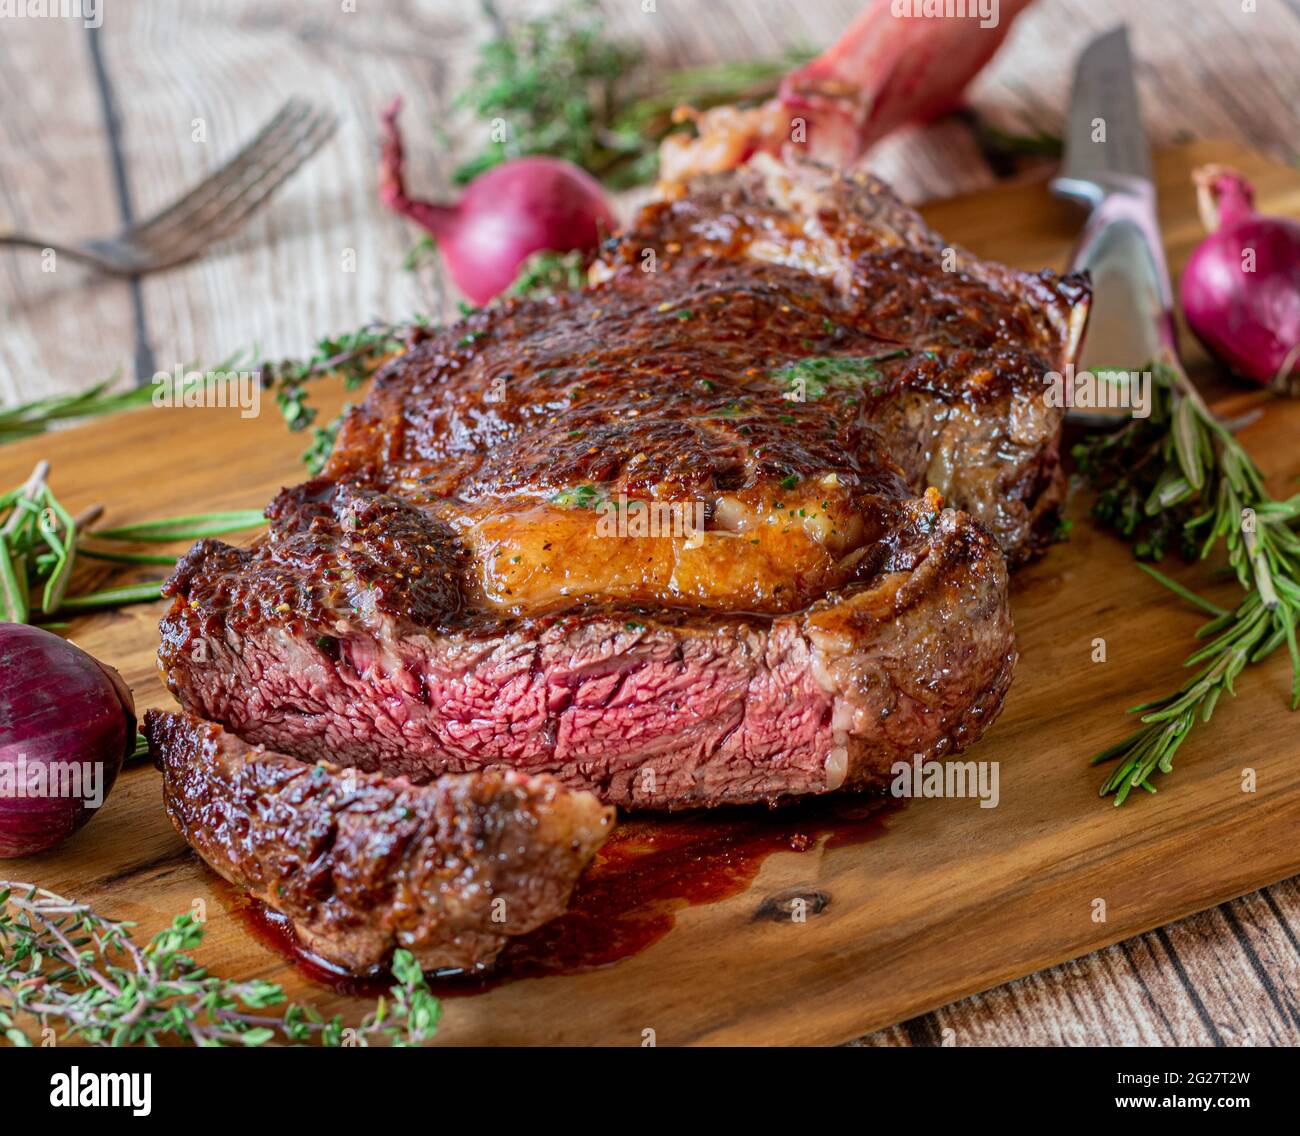 fresh grilled dry aged and irish tomahawk rib eye steak served on a rustic and wooden cutting board with herbs and steak knife Stock Photo